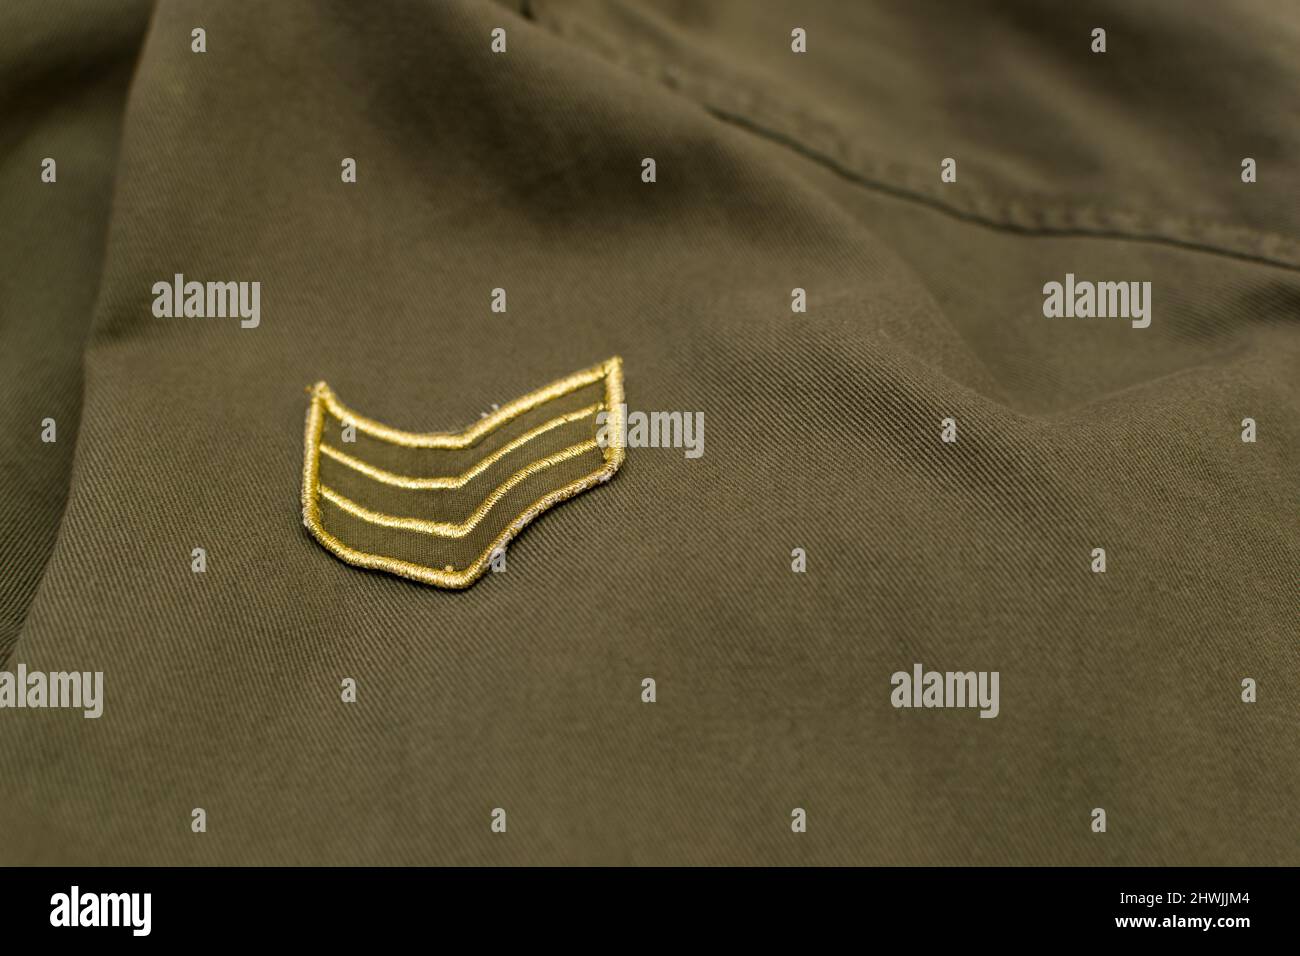 Military rank on military olive green uniform, close up Stock Photo